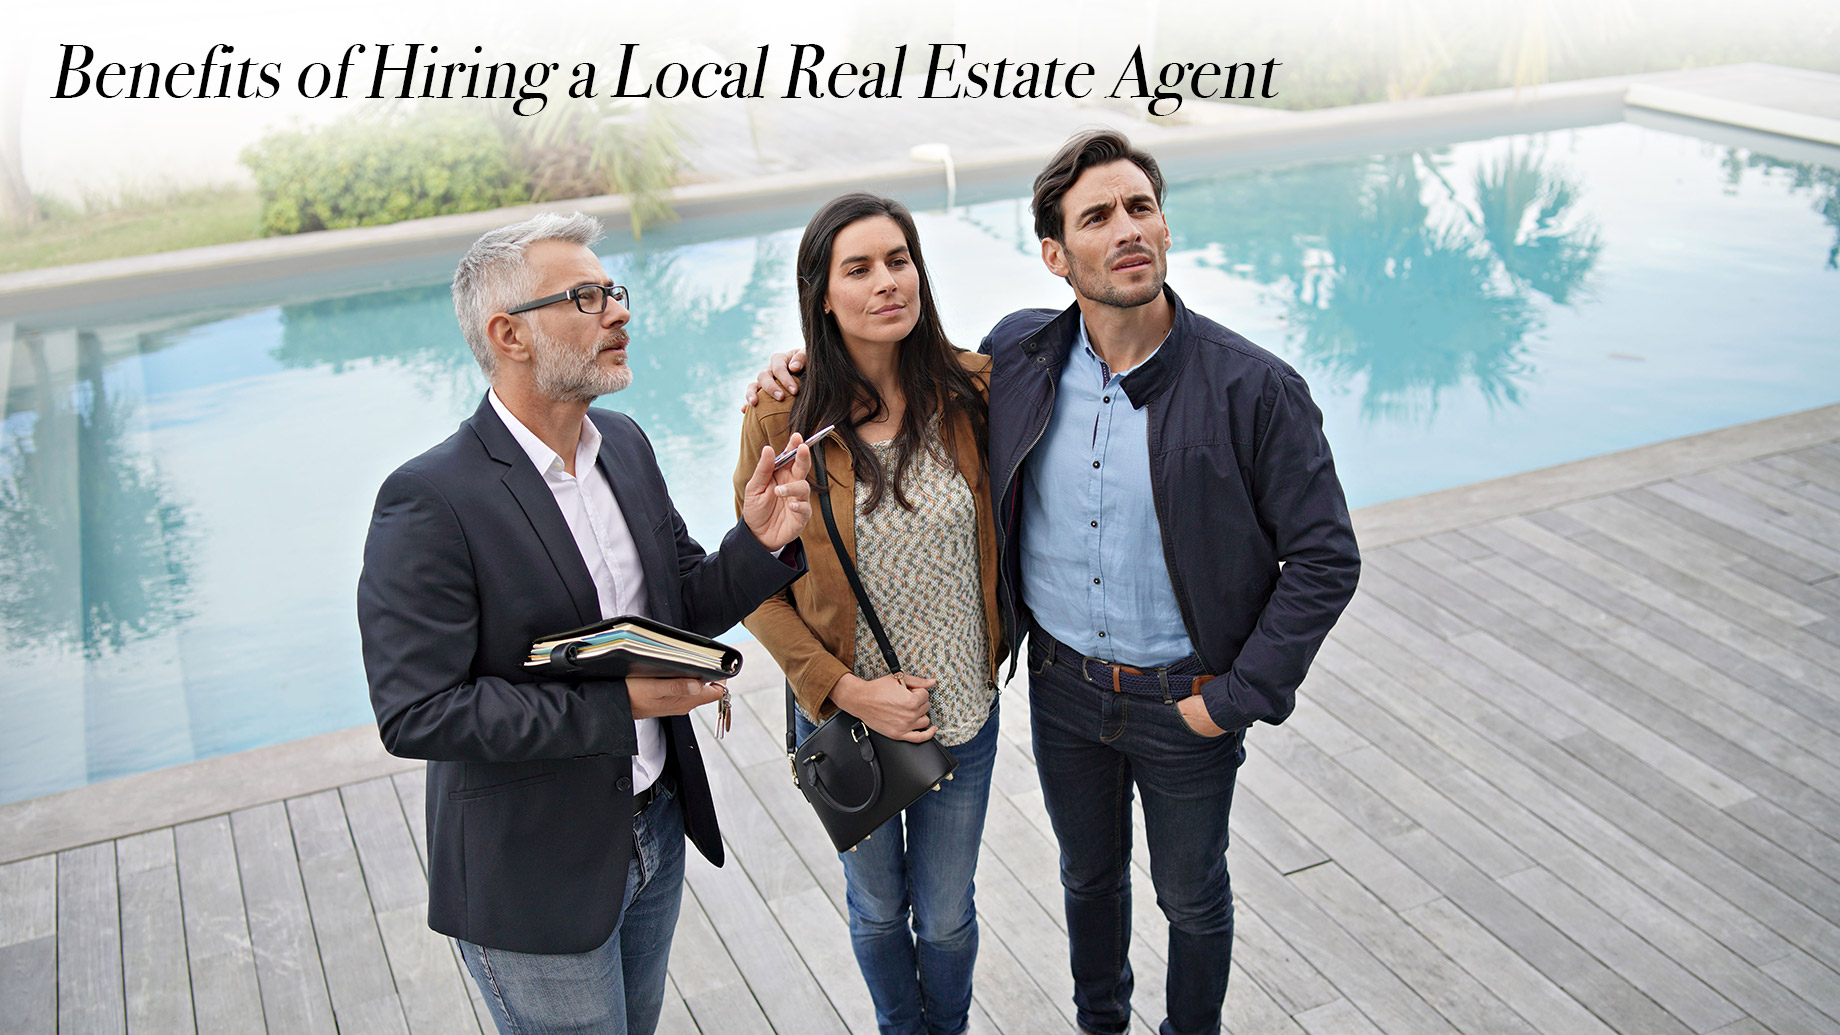 Benefits of Hiring a Local Real Estate Agent